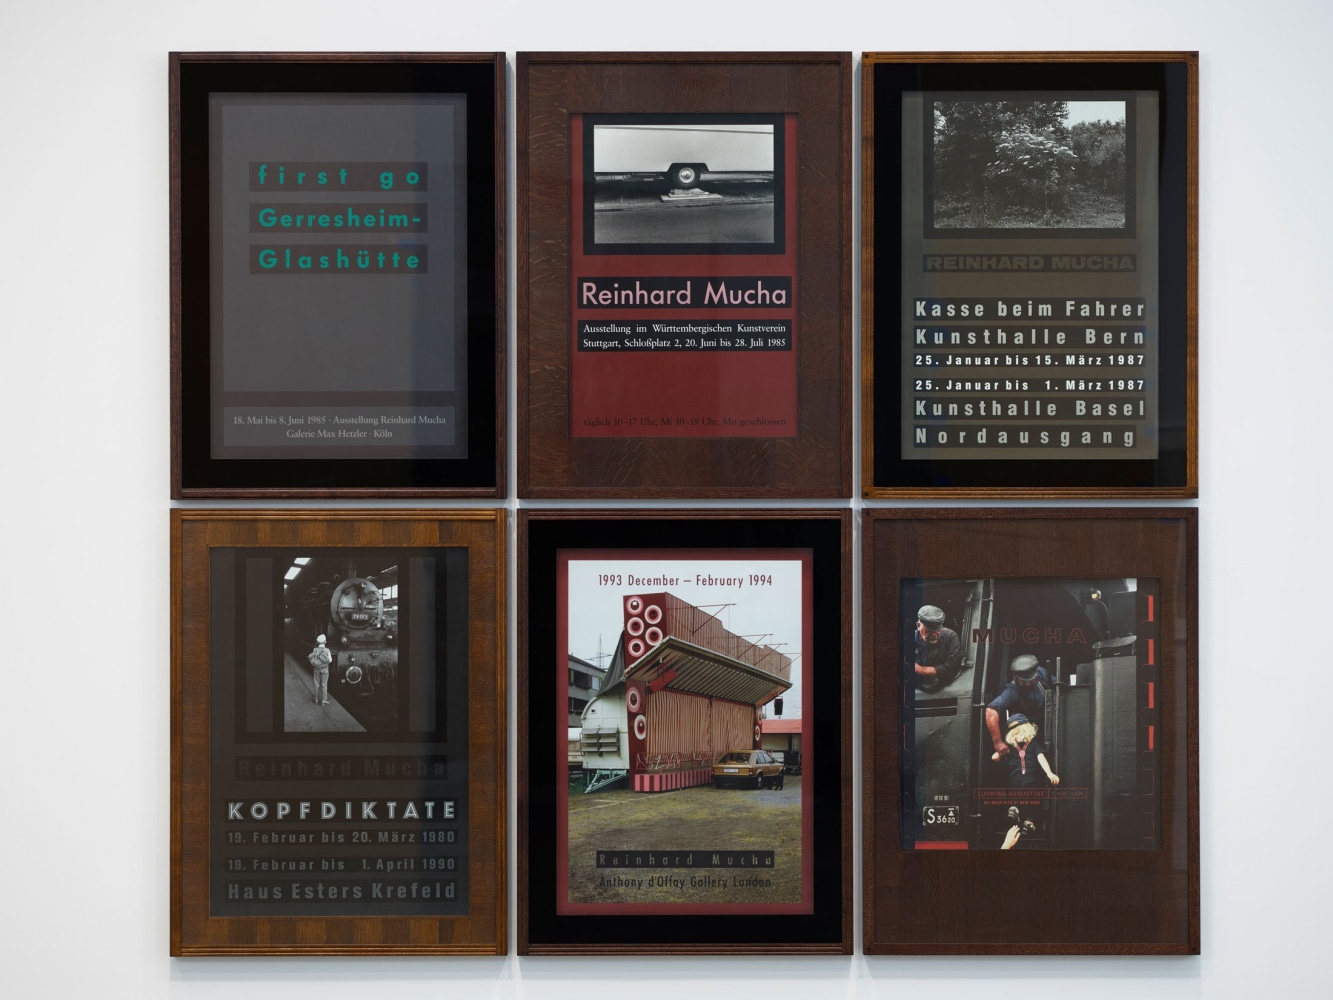 Reinhard Mucha

BBK-SL-KNY-Edition, 1990, 1999

Polyptych, six parts

Edition of&amp;nbsp;12 and&amp;nbsp;3 artist&amp;#39;s&amp;nbsp;proofs

&amp;nbsp;

Profiled solid wood stained and varnished (frame), float glass, alkyd enamel painted on reverse of glass, blockboard veneered, stained and varnished (mat), offset print on fine art

paper, Iris Gicl&amp;eacute;e print on deckle edged paper

Four parts: 45.43 x 34.17 x 2.28 inches (115.4 x 86.8 x 5.8 cm)

Two parts: 45.43 x 34.17 x 2.44 inches (115.4 x 86.8 x 6.2 cm)

Overall dimensions: 91.65 x 103.46 x 2.44 inches (232.8 x 262.8 x 6.2 cm)